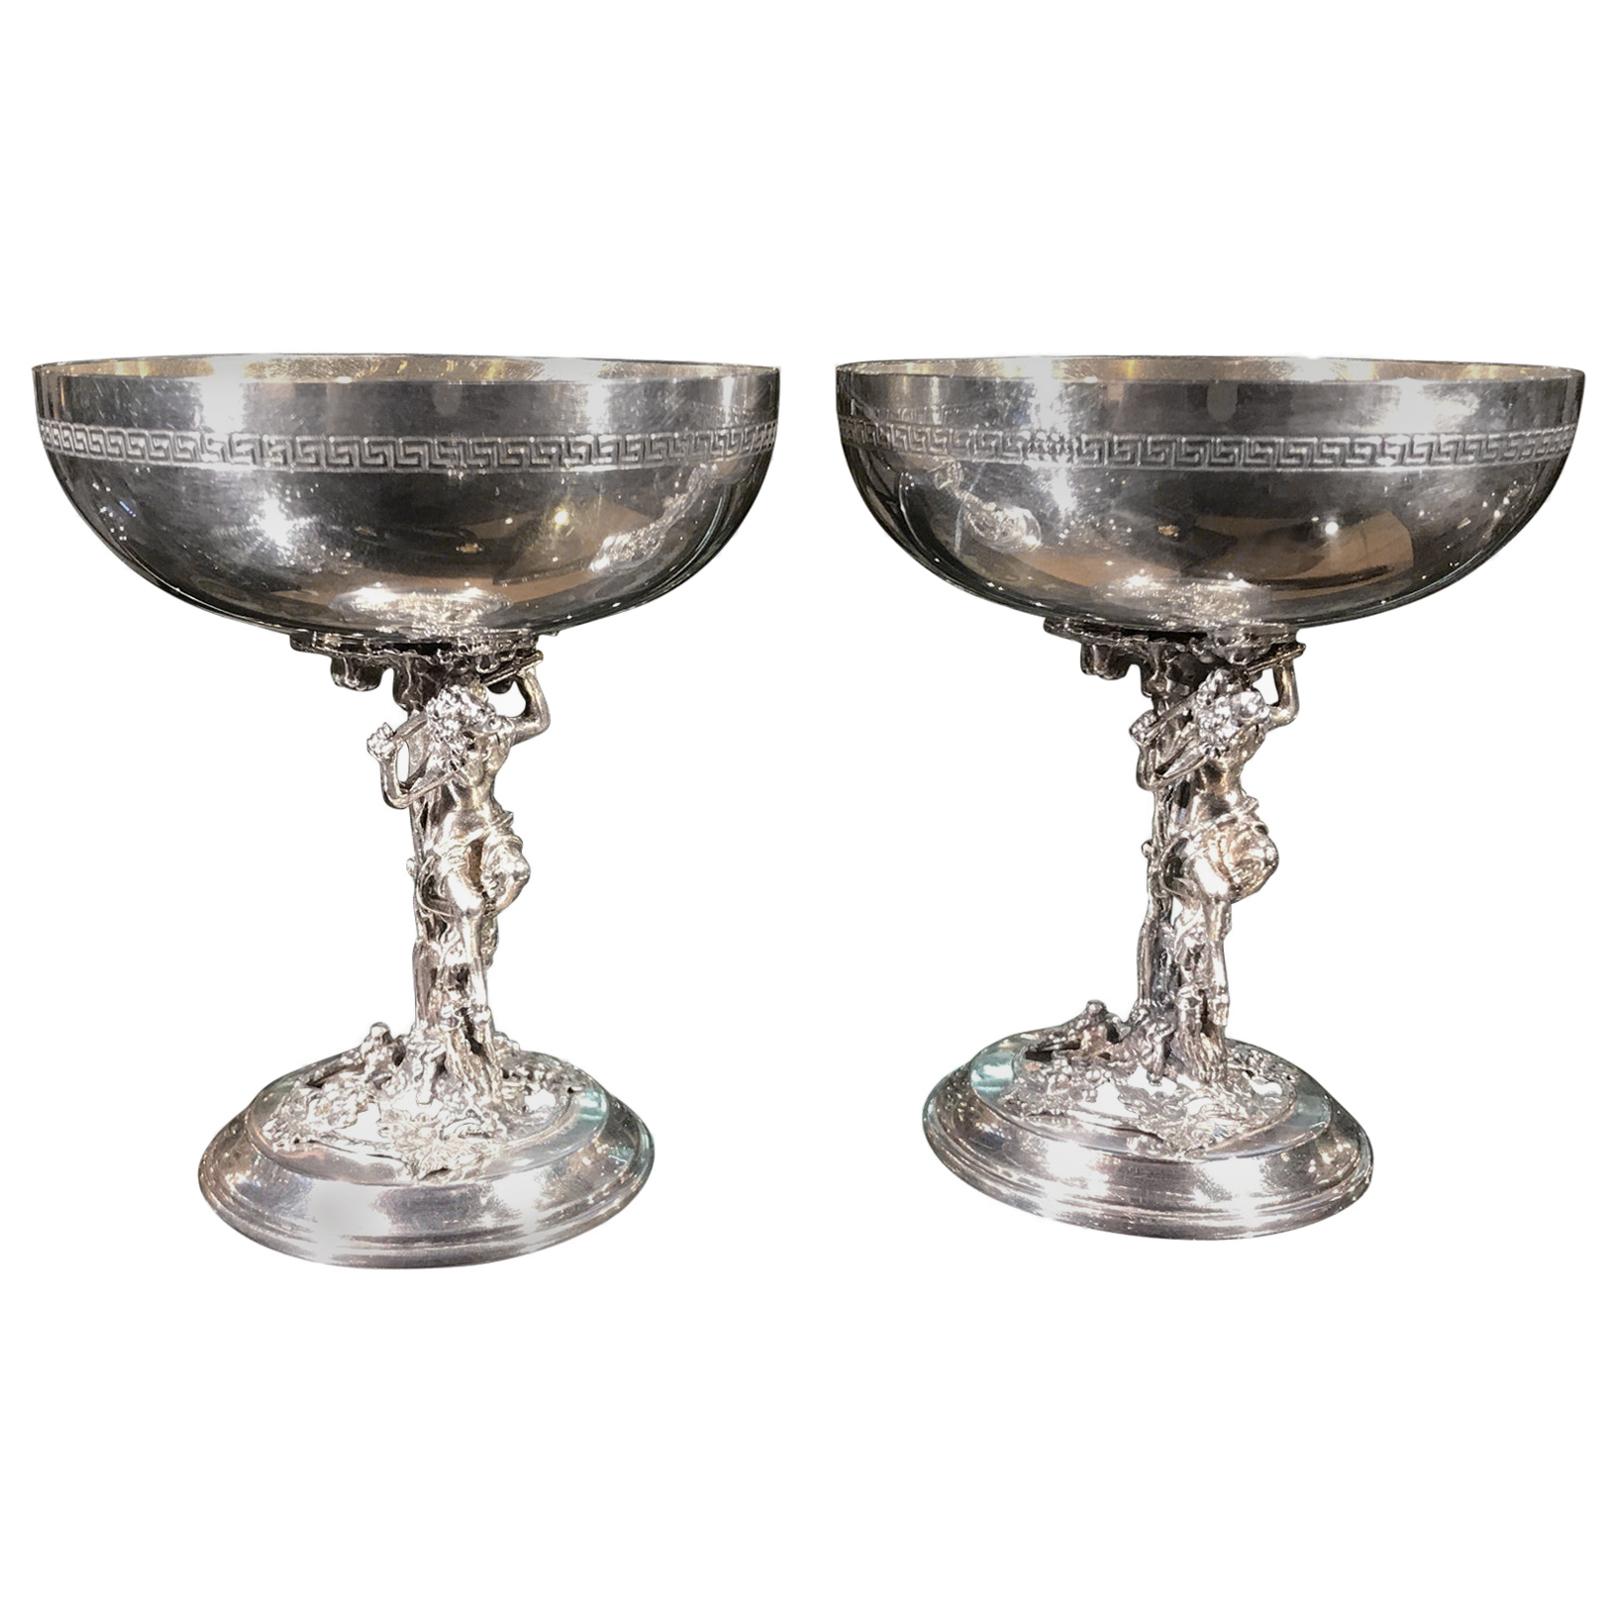 Pair of Silver Plate Bacchanalian Toasting Champagne Coupes